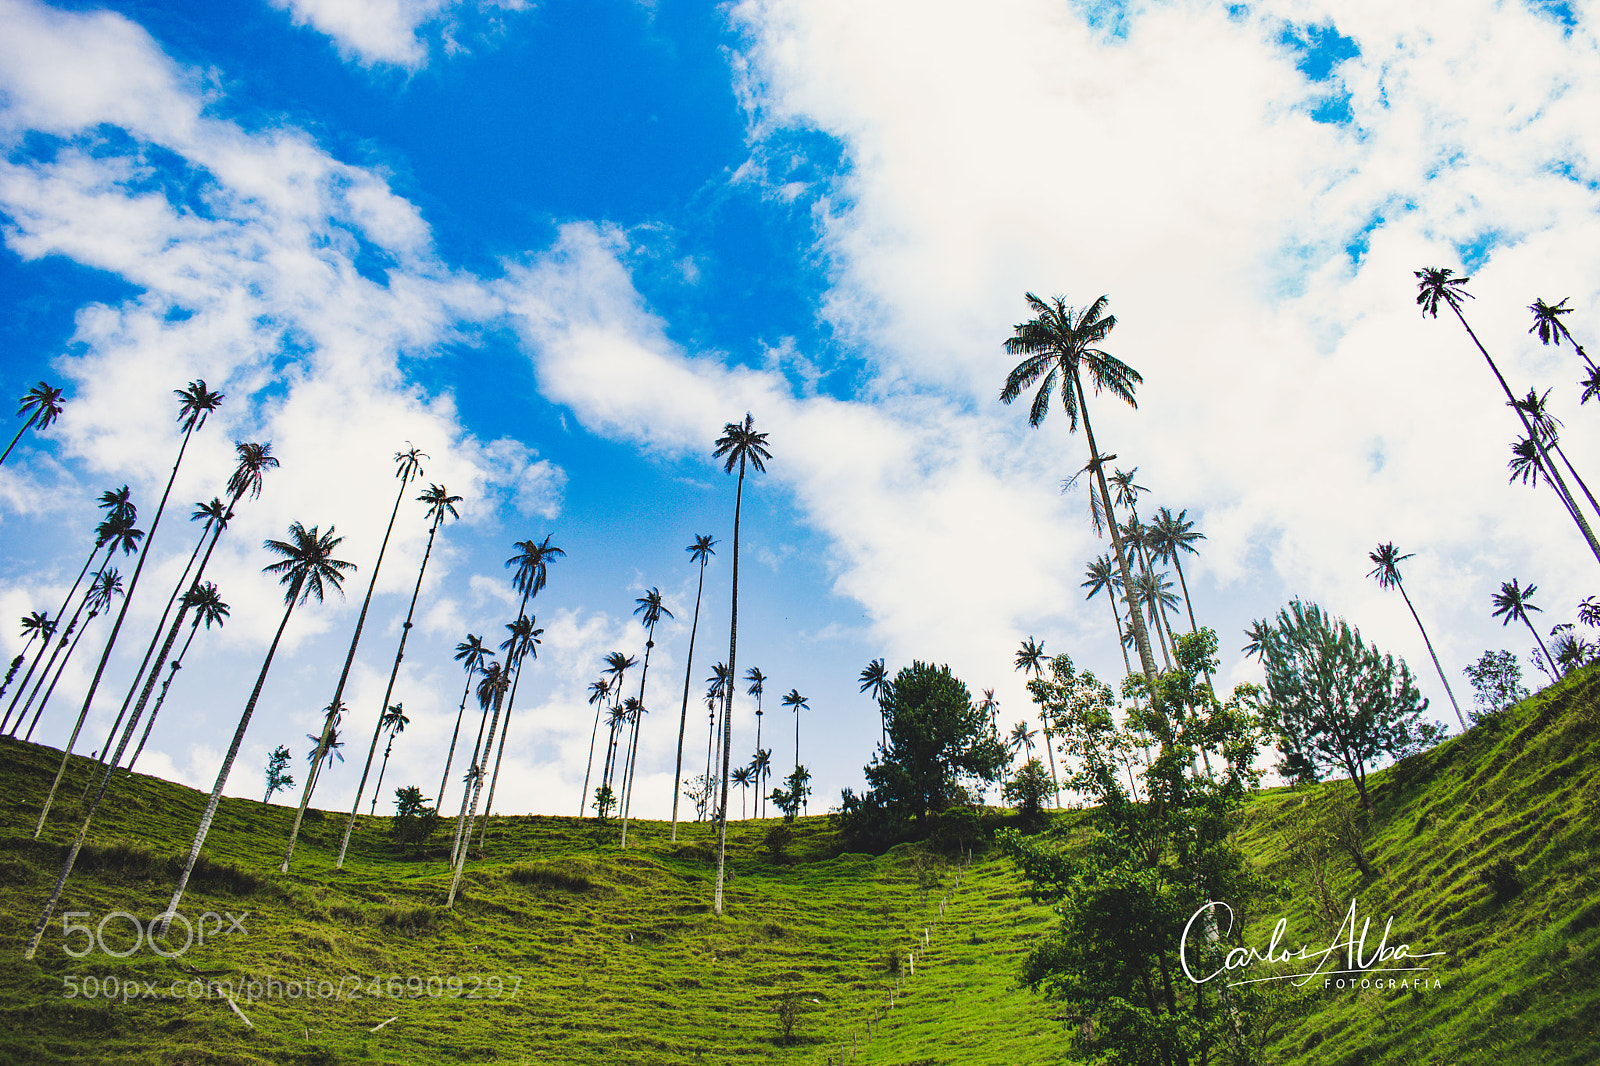 Nikon D5300 sample photo. Sentinels from cocora valley photography